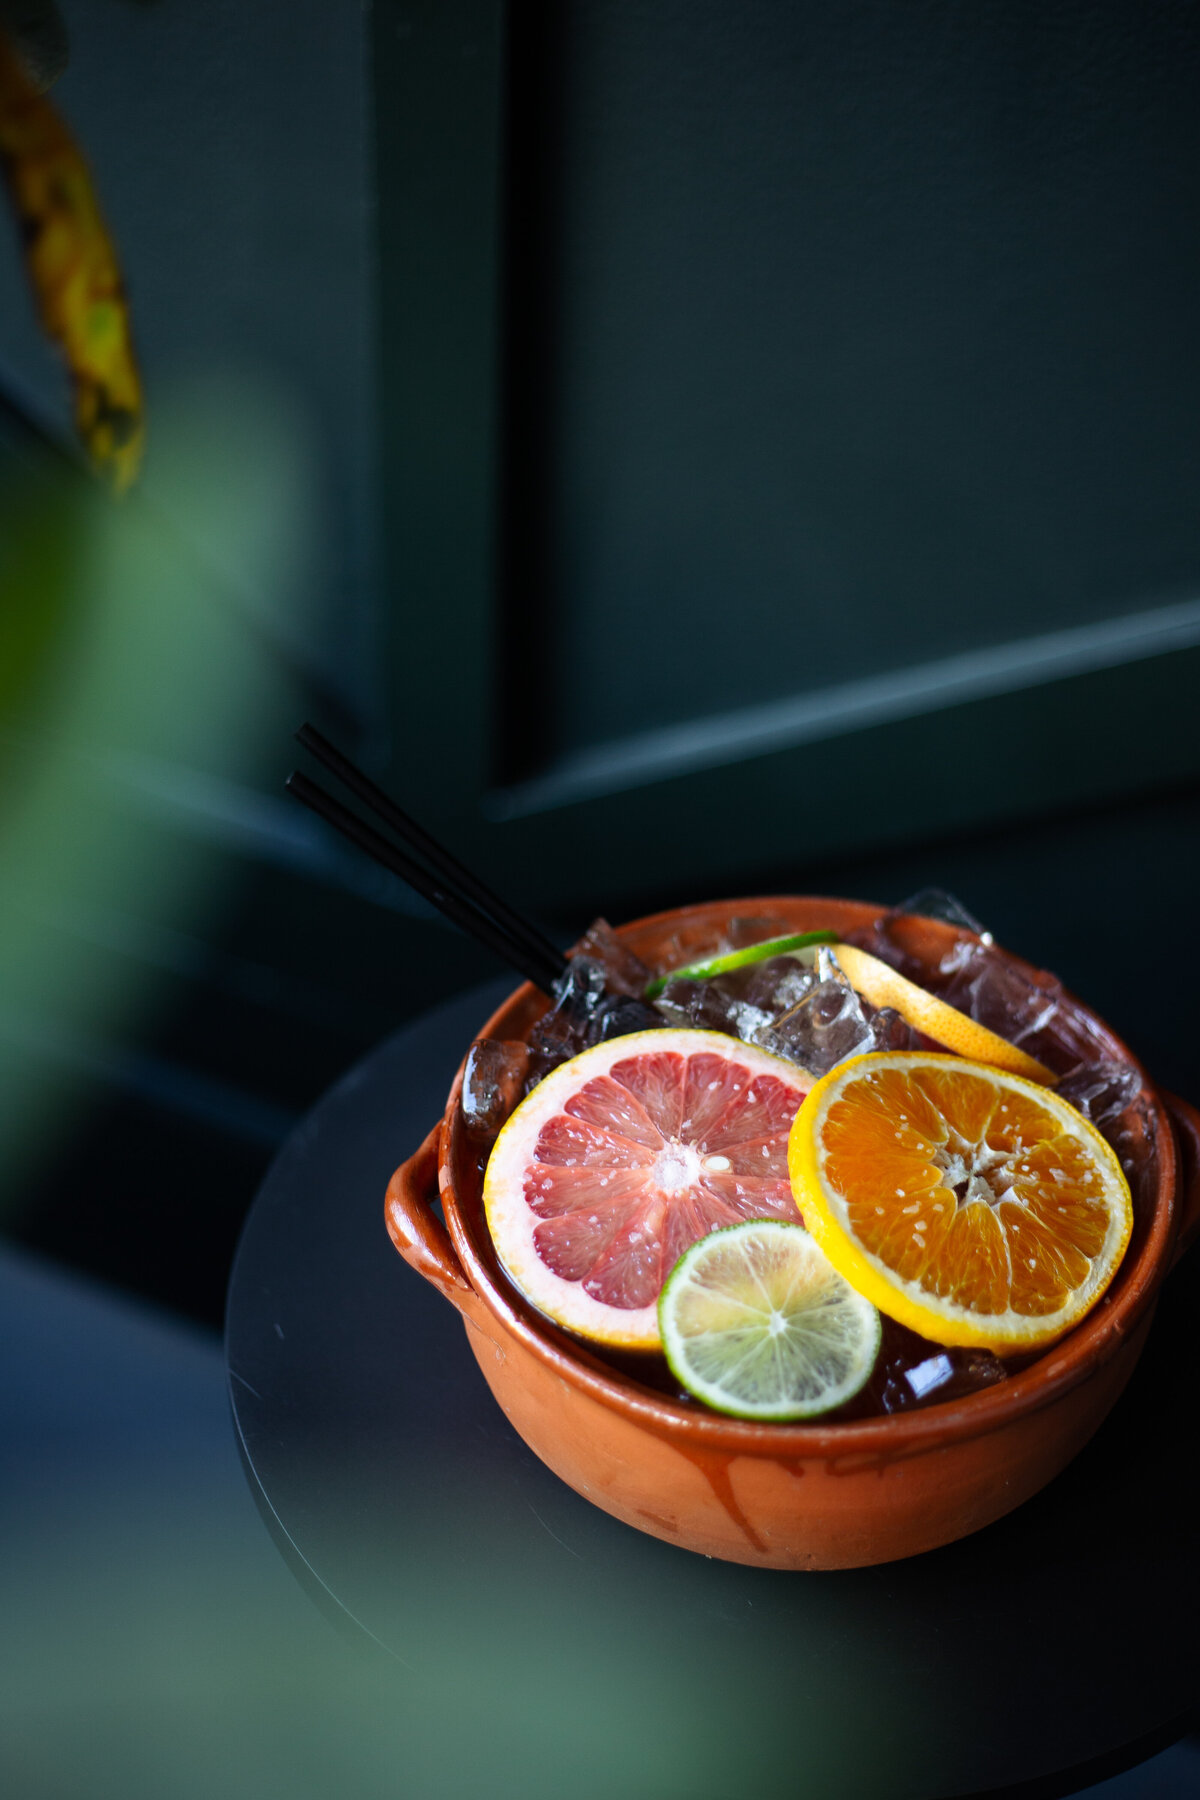 A cocktail containing fresh fruit slices photographed through leaves sits on a table in front of a dark green wall.